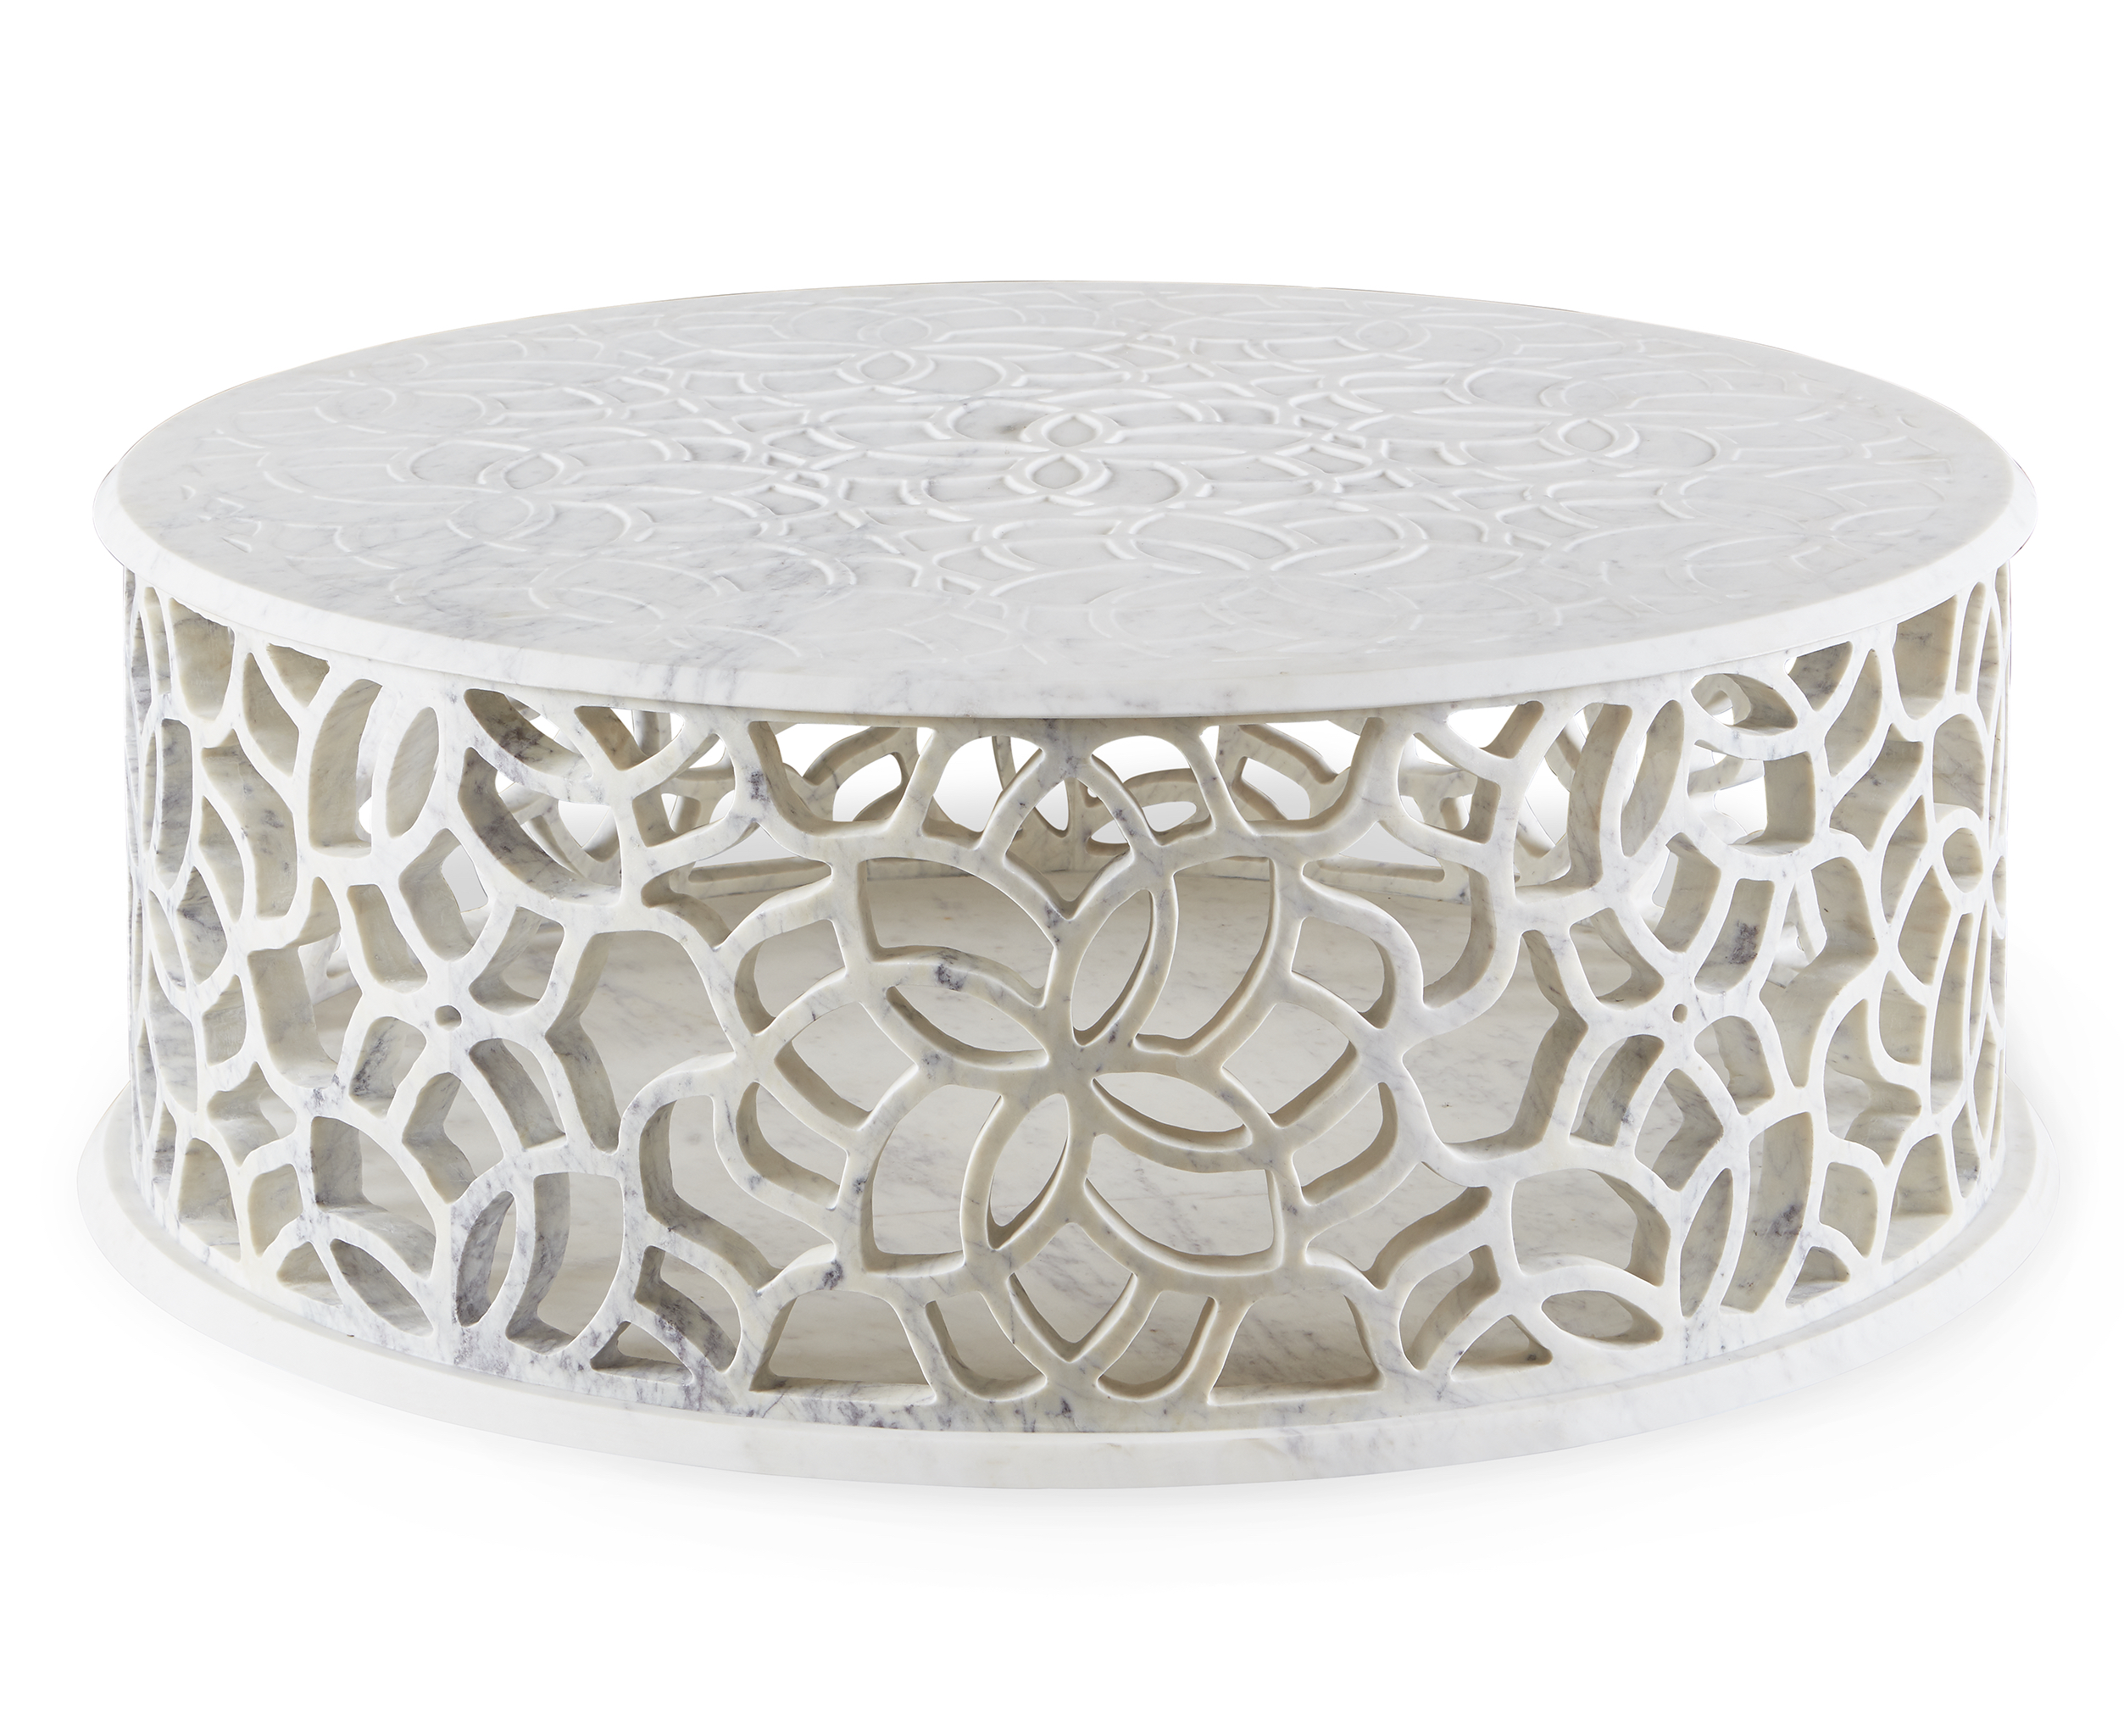 Baker_products_WNWN_pierced_bangle_table_BAA3255_FRONT_resize-1-1